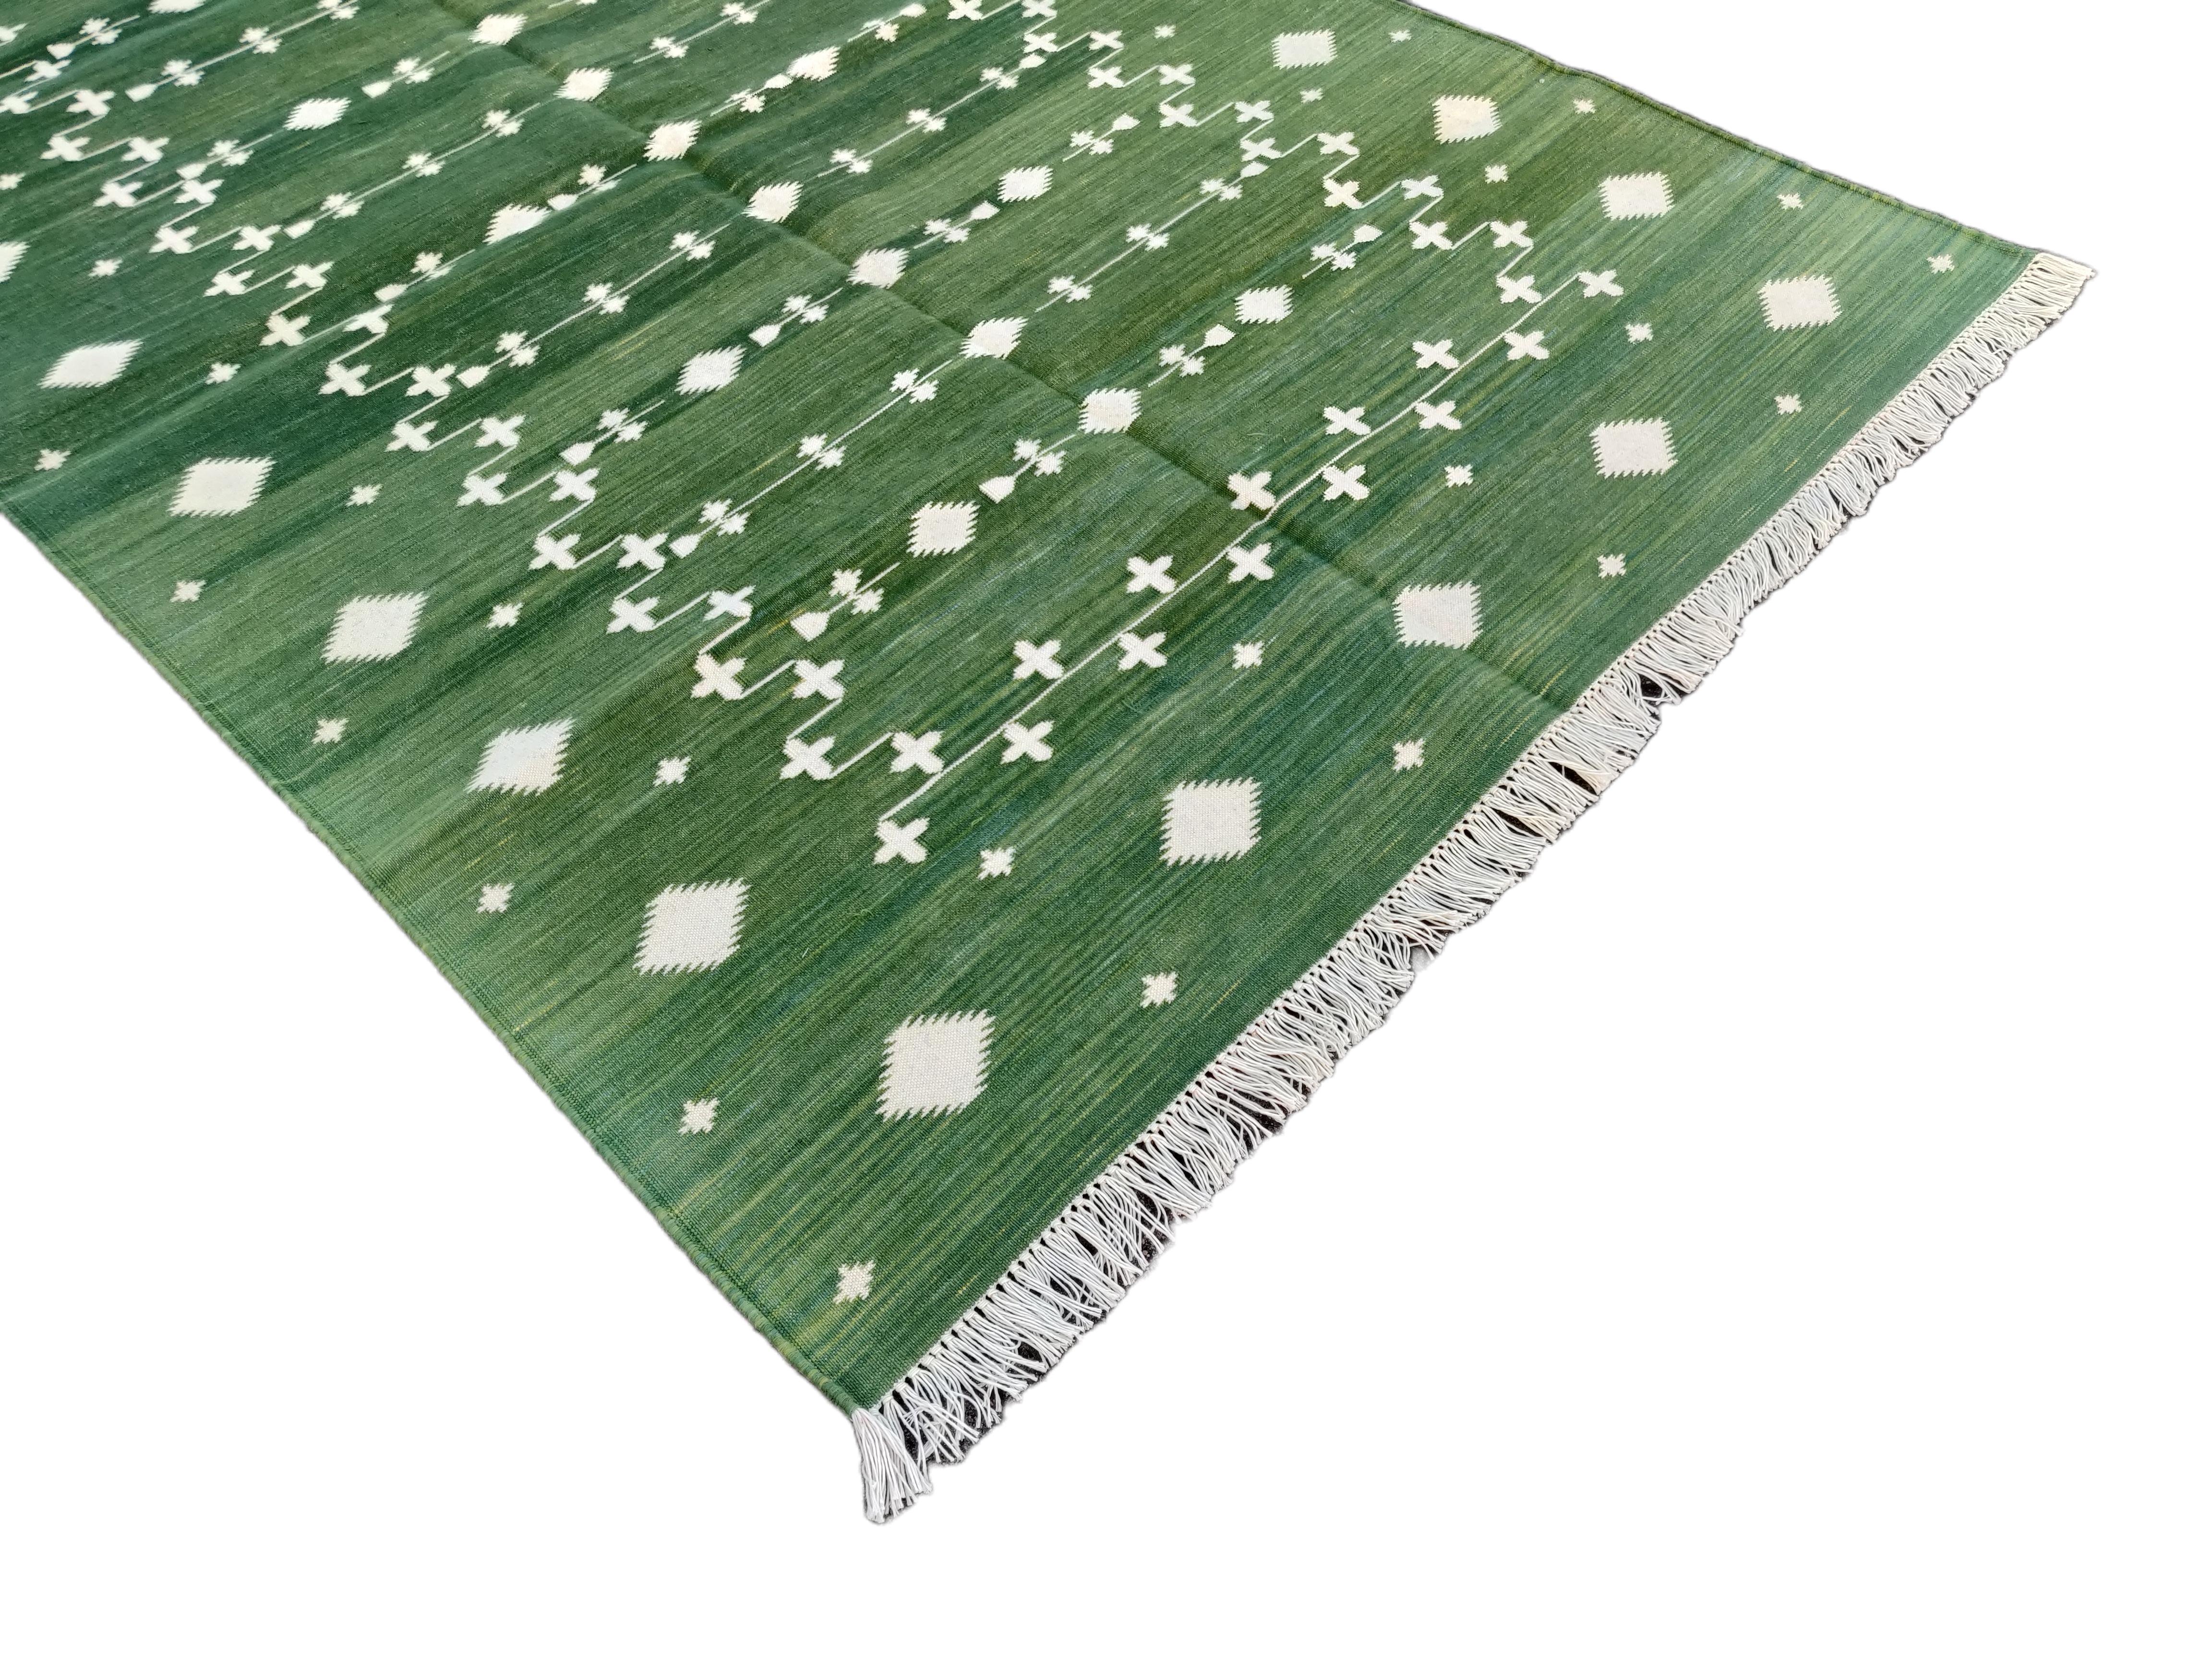 Hand-Woven Handmade Cotton Area Flat Weave Rug, 4x6 Green Shooting Star Indian Dhurrie Rug For Sale